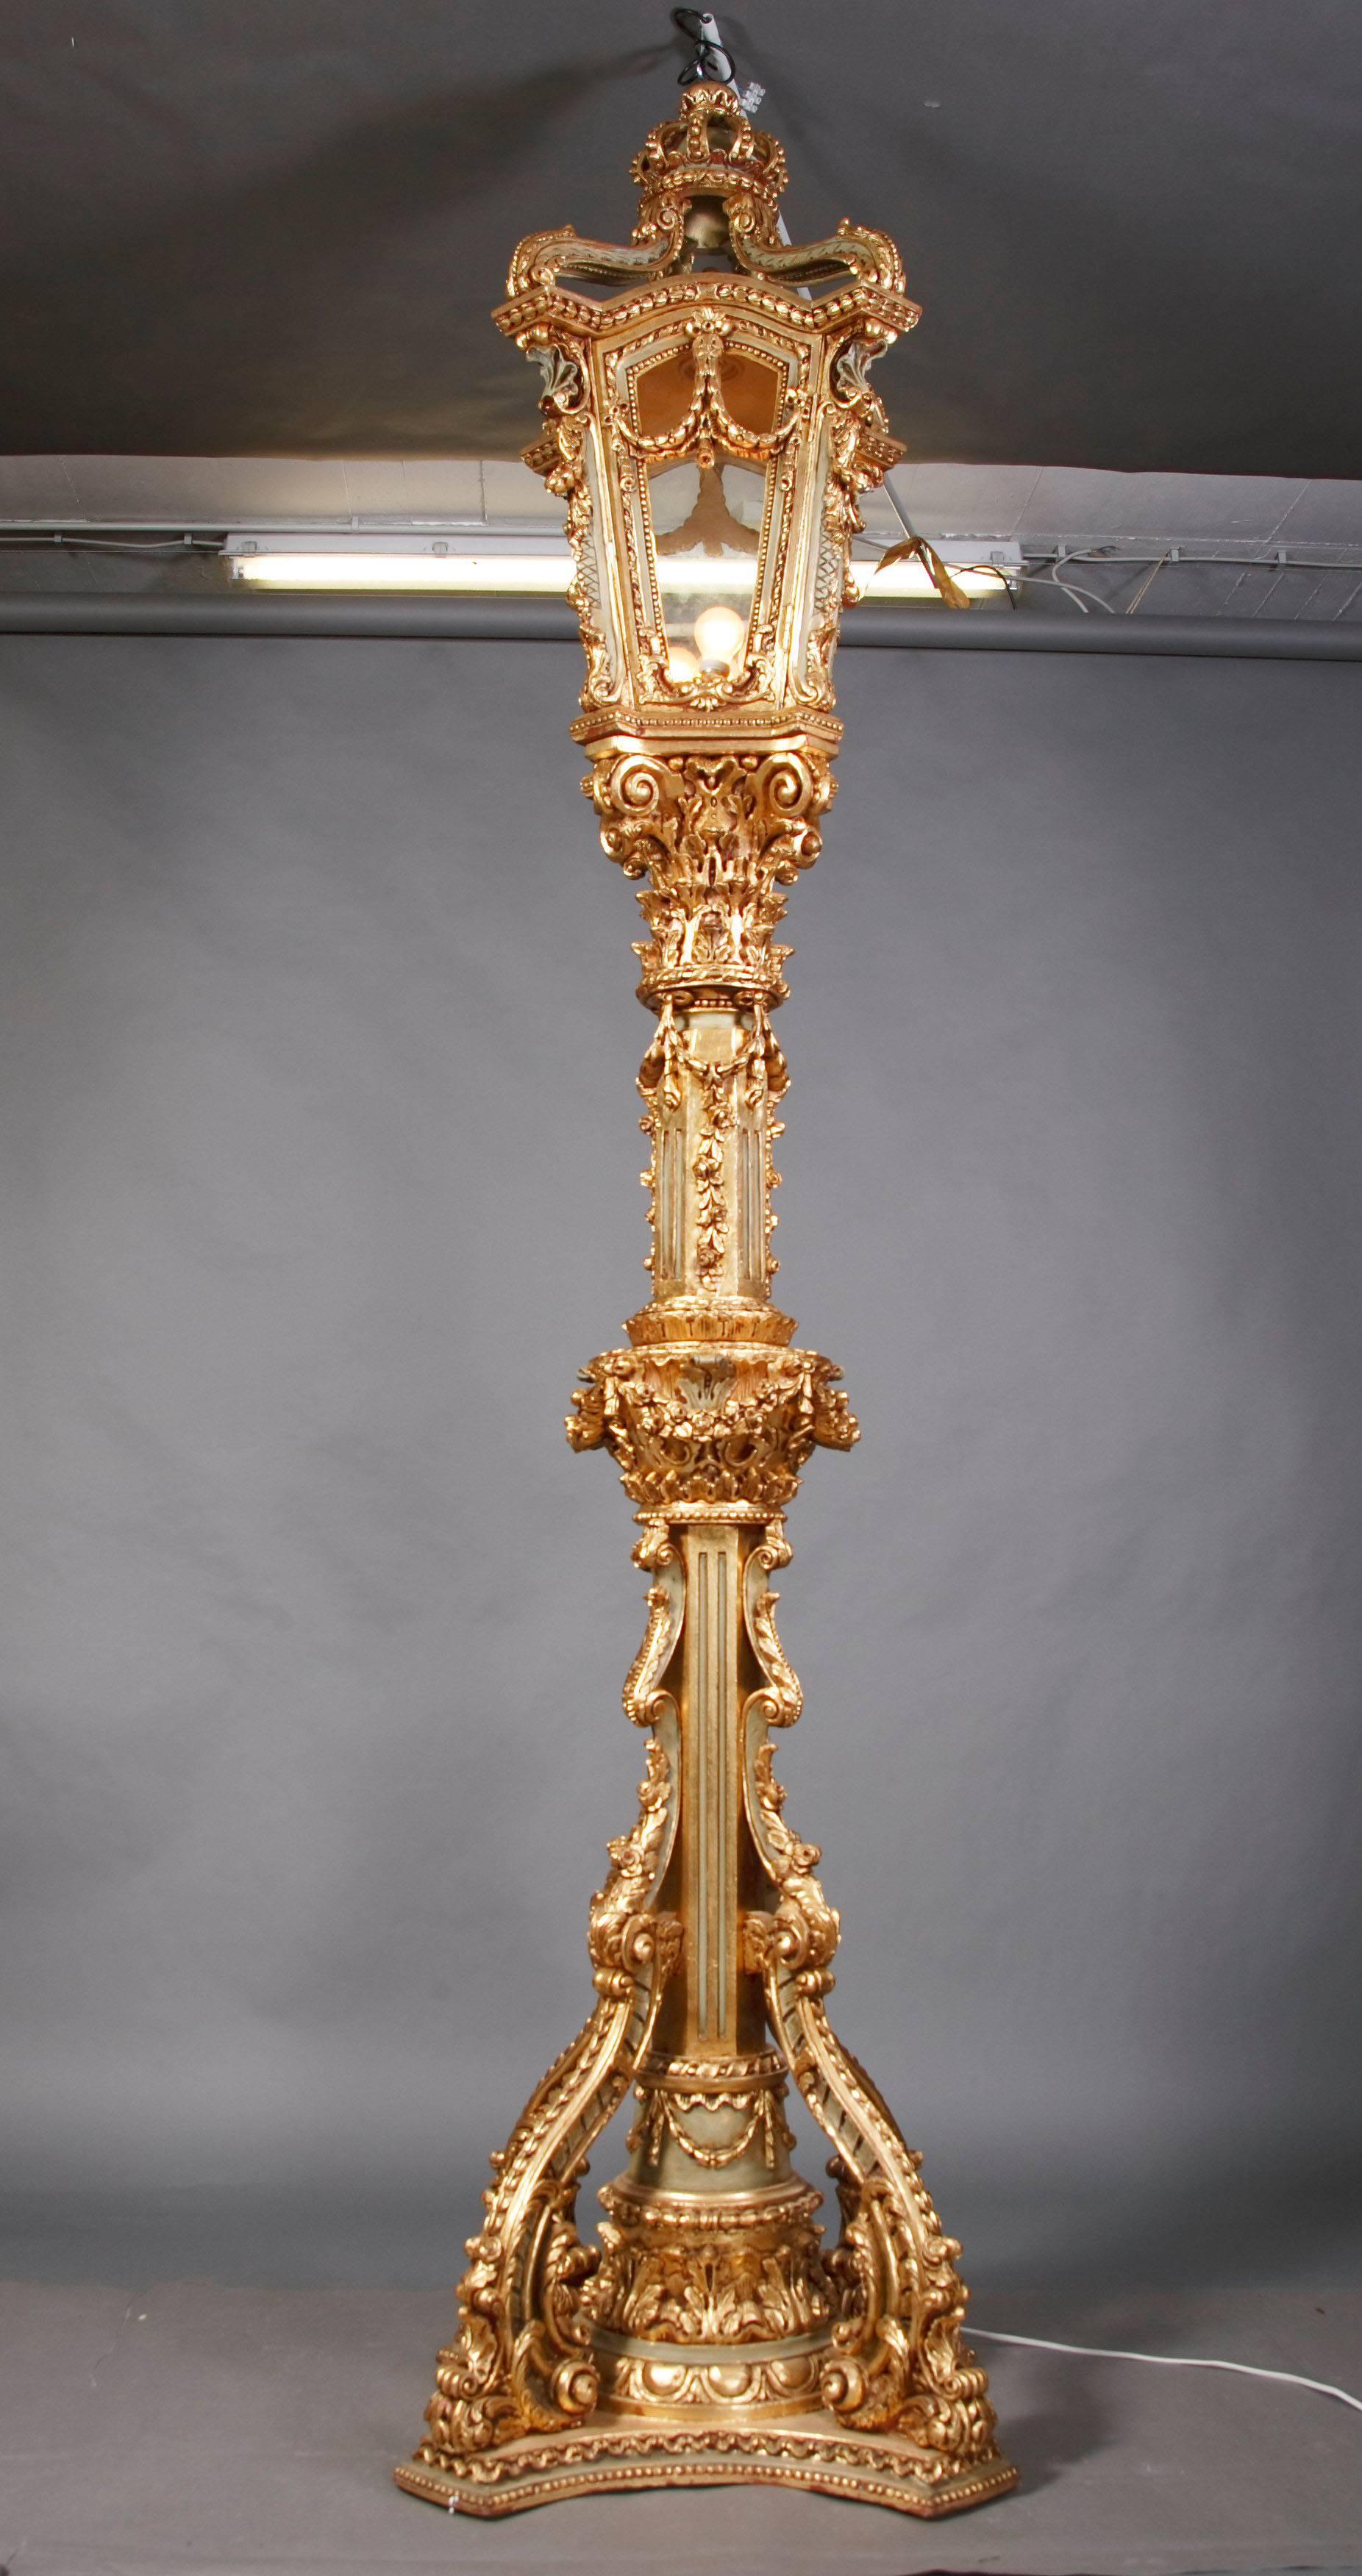 Castle-Worthy monumental candelabra.
Highly valuable, carved beechwood, inlaid and gilded. Multi structured in detail, finely carved pillar-shaft on four sided, retracted, graded pedestal, the under part of the pillar-shaft is flanked by four